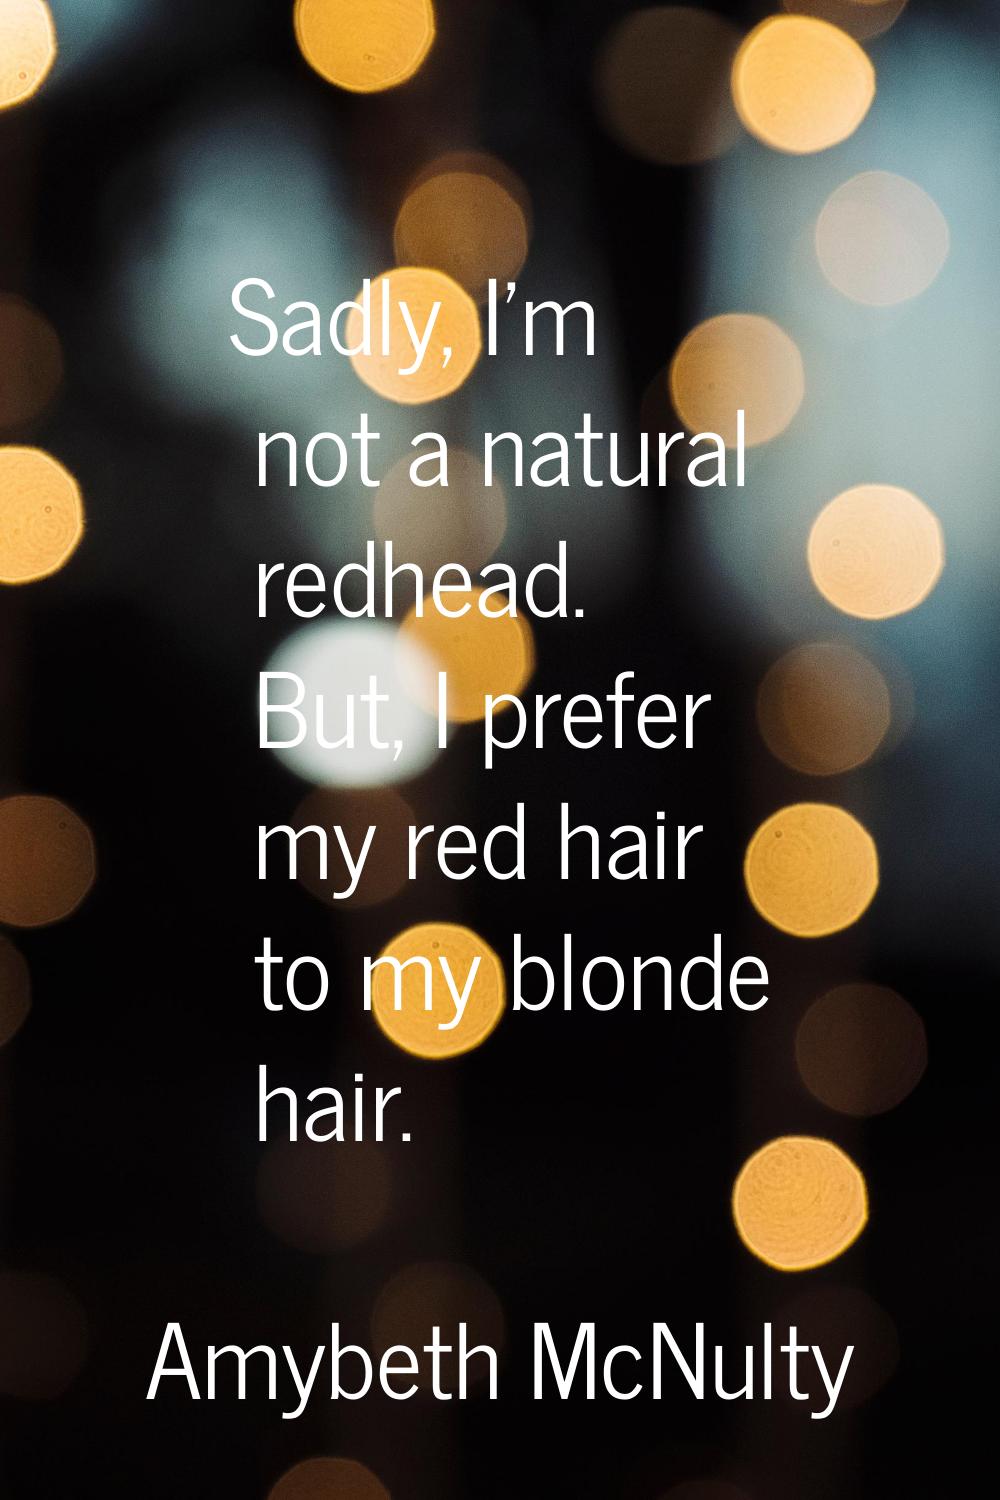 Sadly, I'm not a natural redhead. But, I prefer my red hair to my blonde hair.